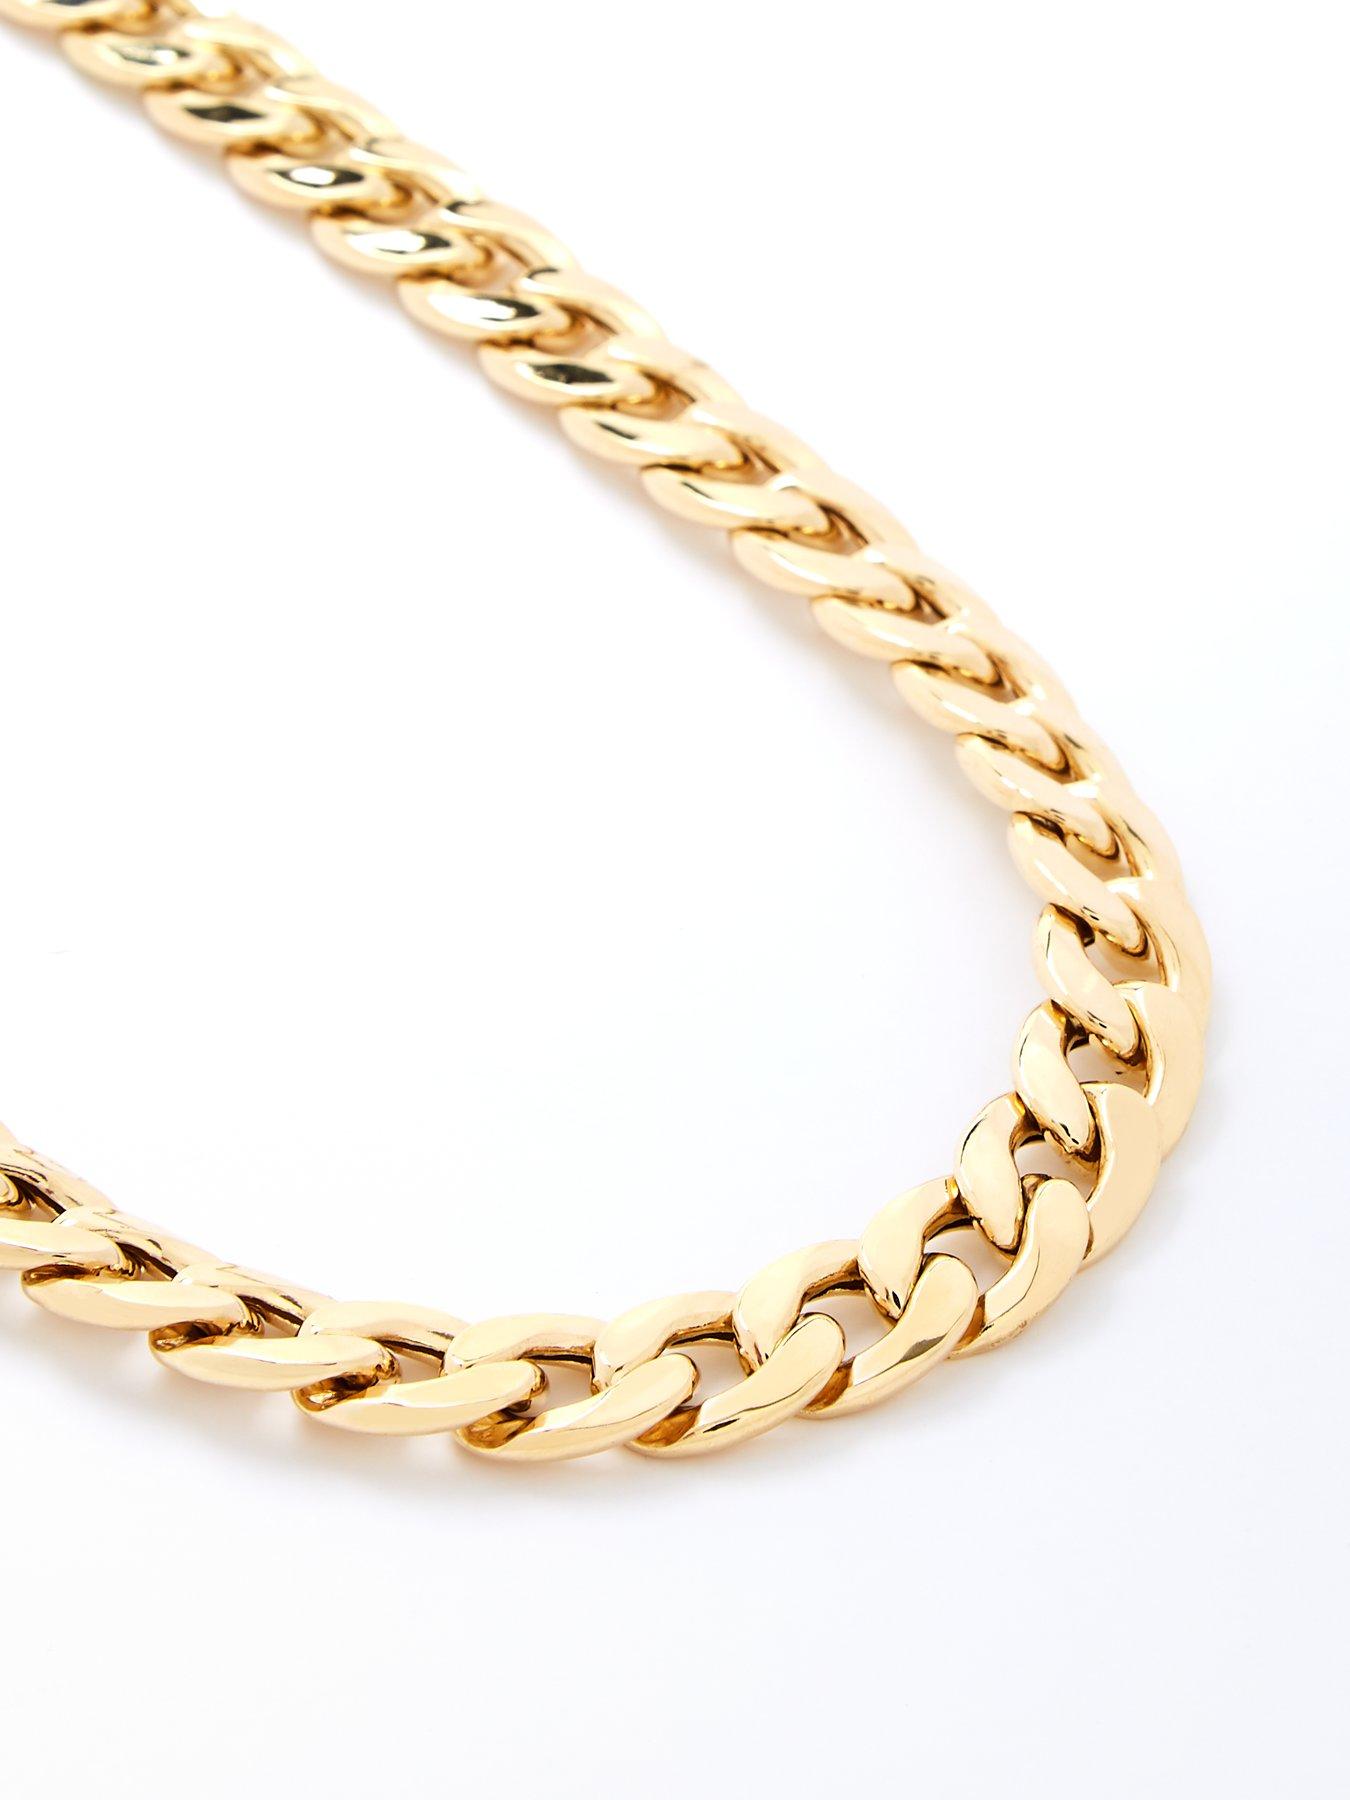  9ct Yellow Gold 1 and 1/2 oz Solid Diamond Cut 20 Inch Curb Chain